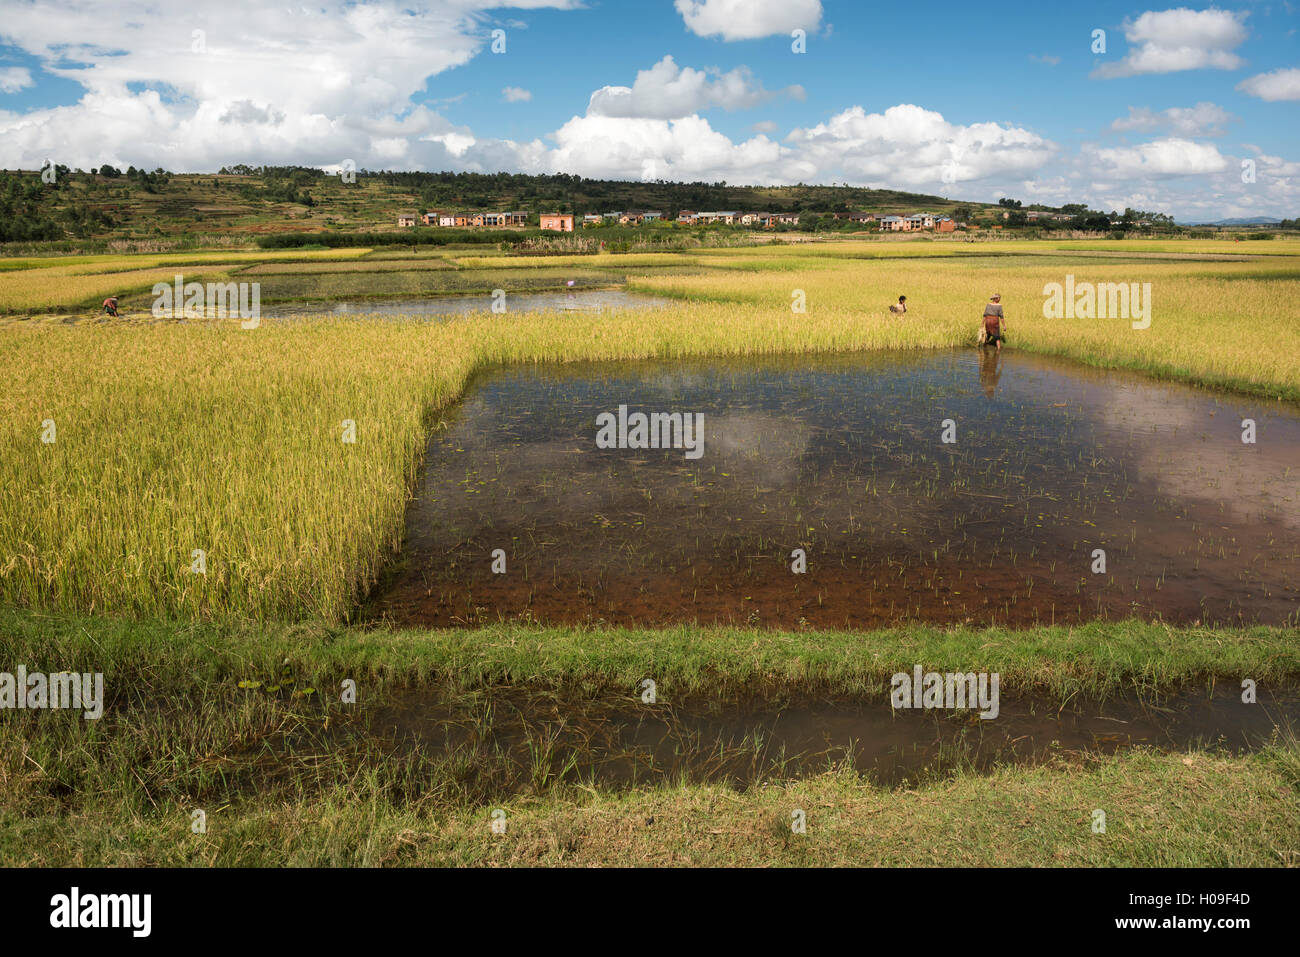 Rice paddy fields on RN7 (Route Nationale 7) near Ambatolampy in the Central Highlands of Madagascar, Africa Stock Photo